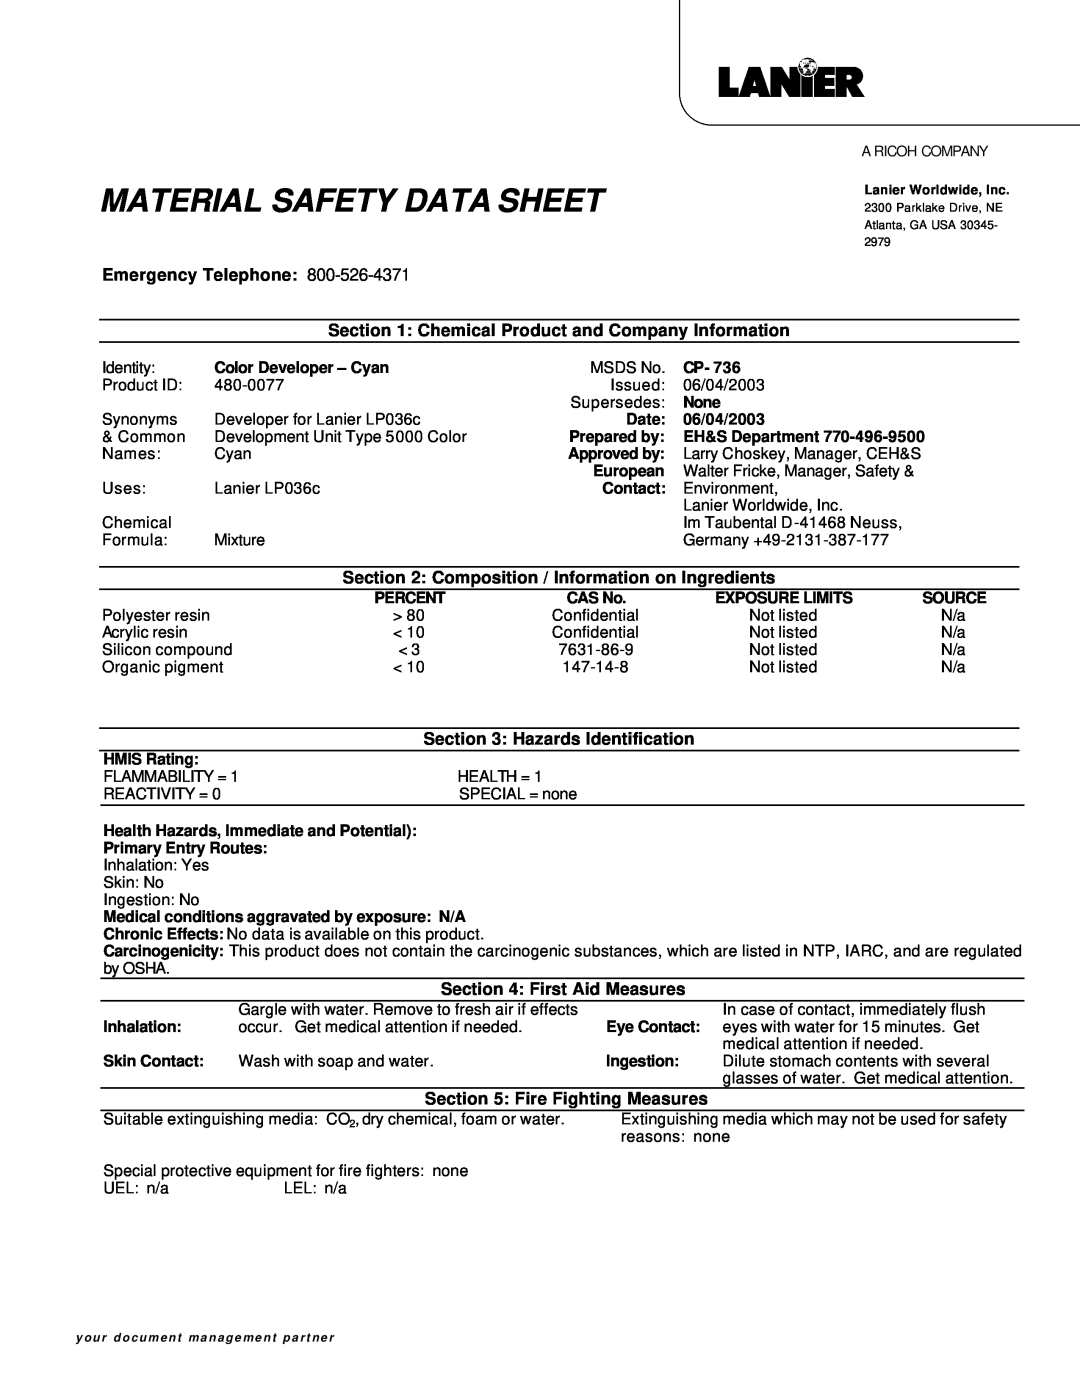 Lanier RS232 manual Material Safety Data Sheet, Emergency Telephone, Hazards Identification, First Aid Measures 